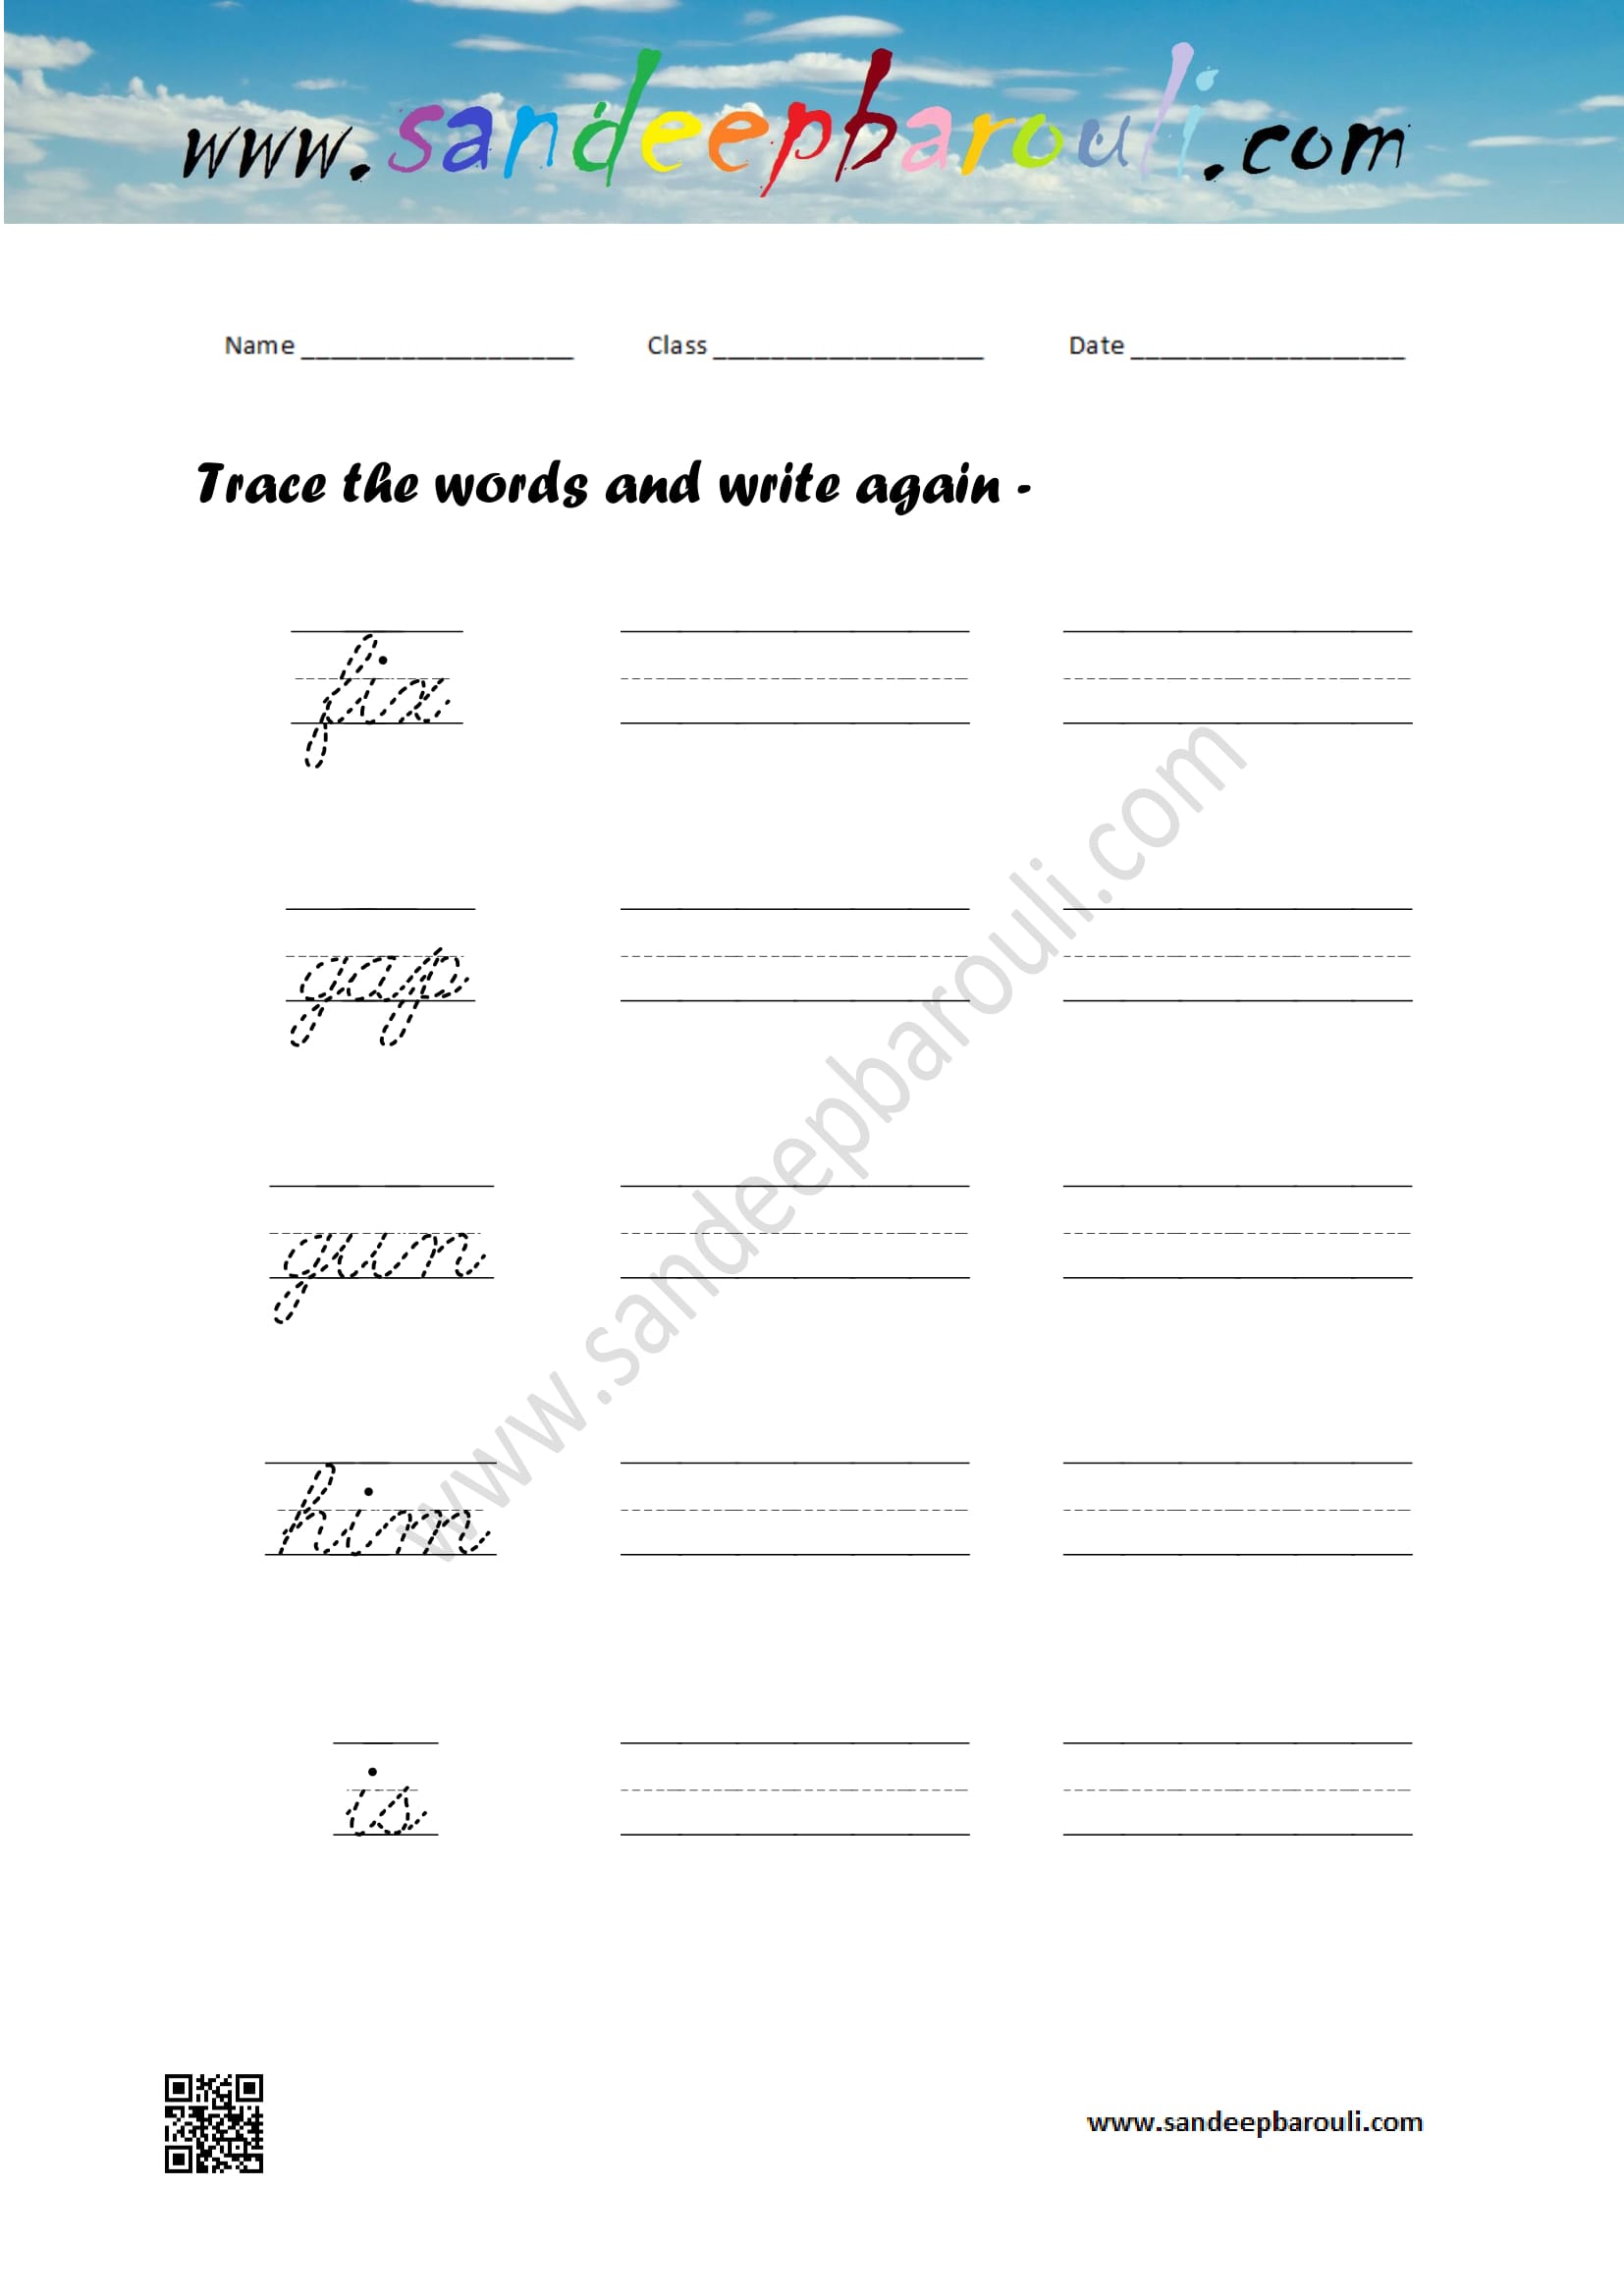 Cursive writing worksheet – trace the words and write again (37)